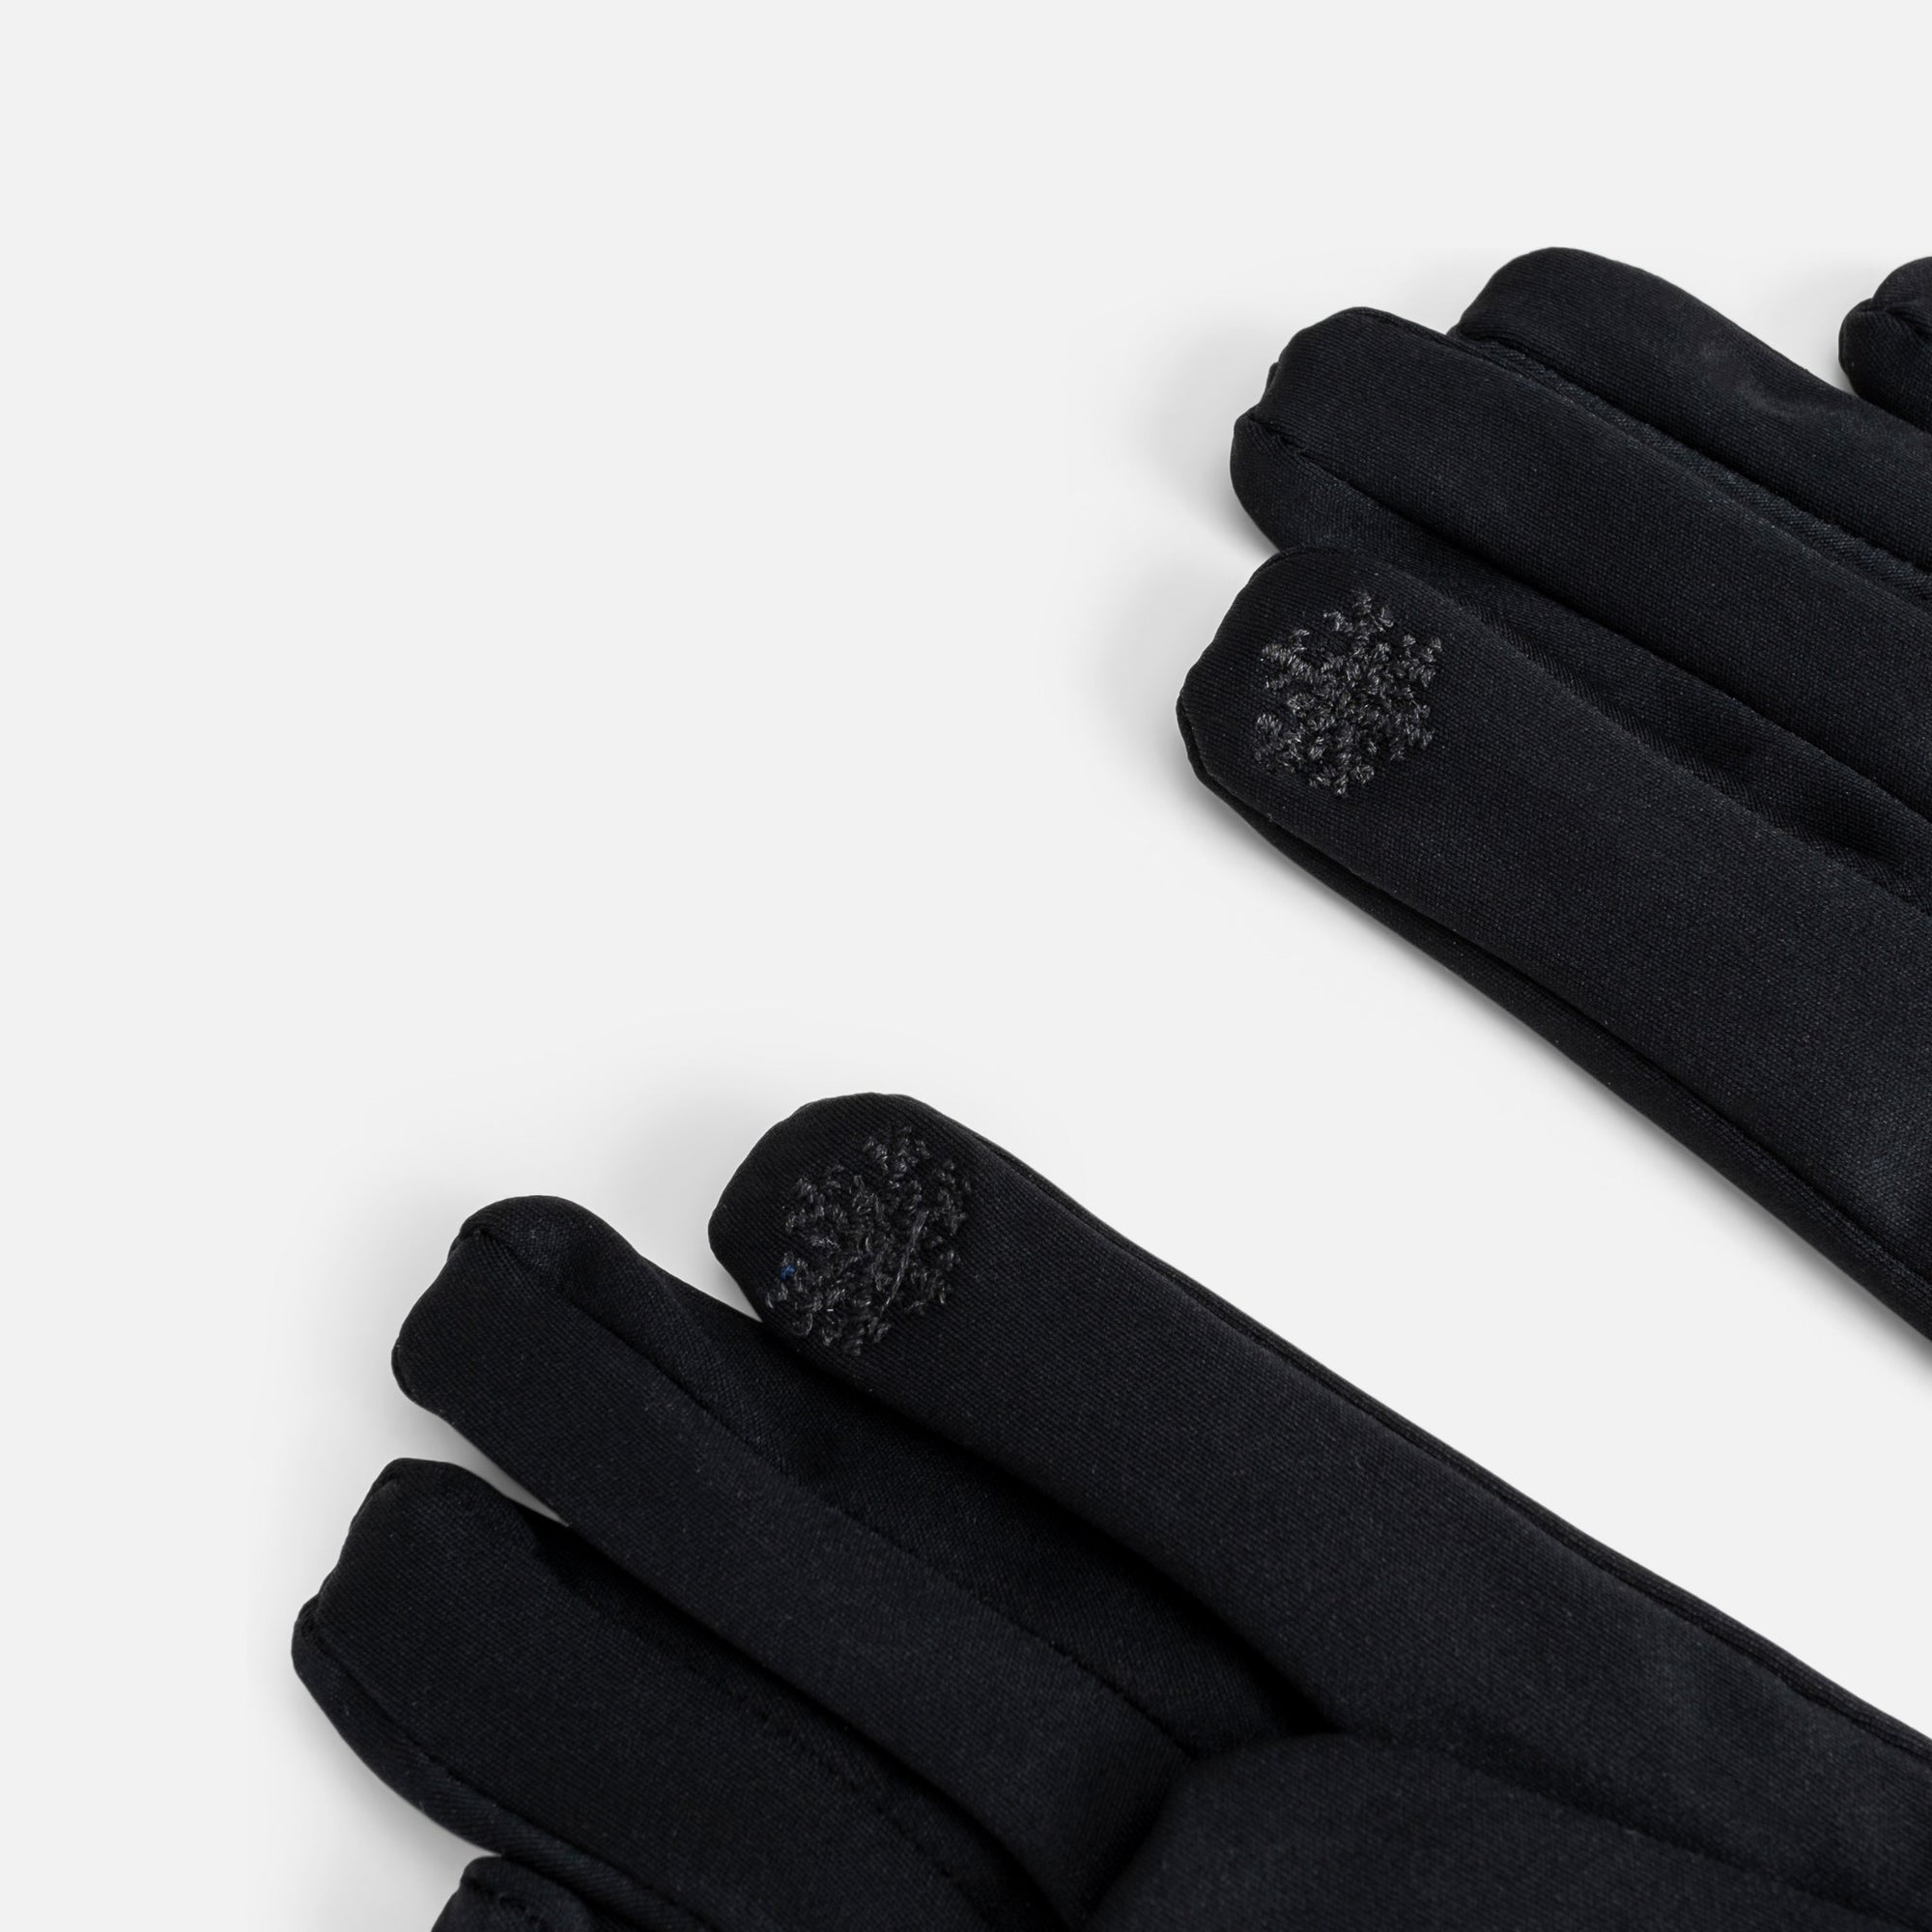 Black gloves with lined details at the cuffs